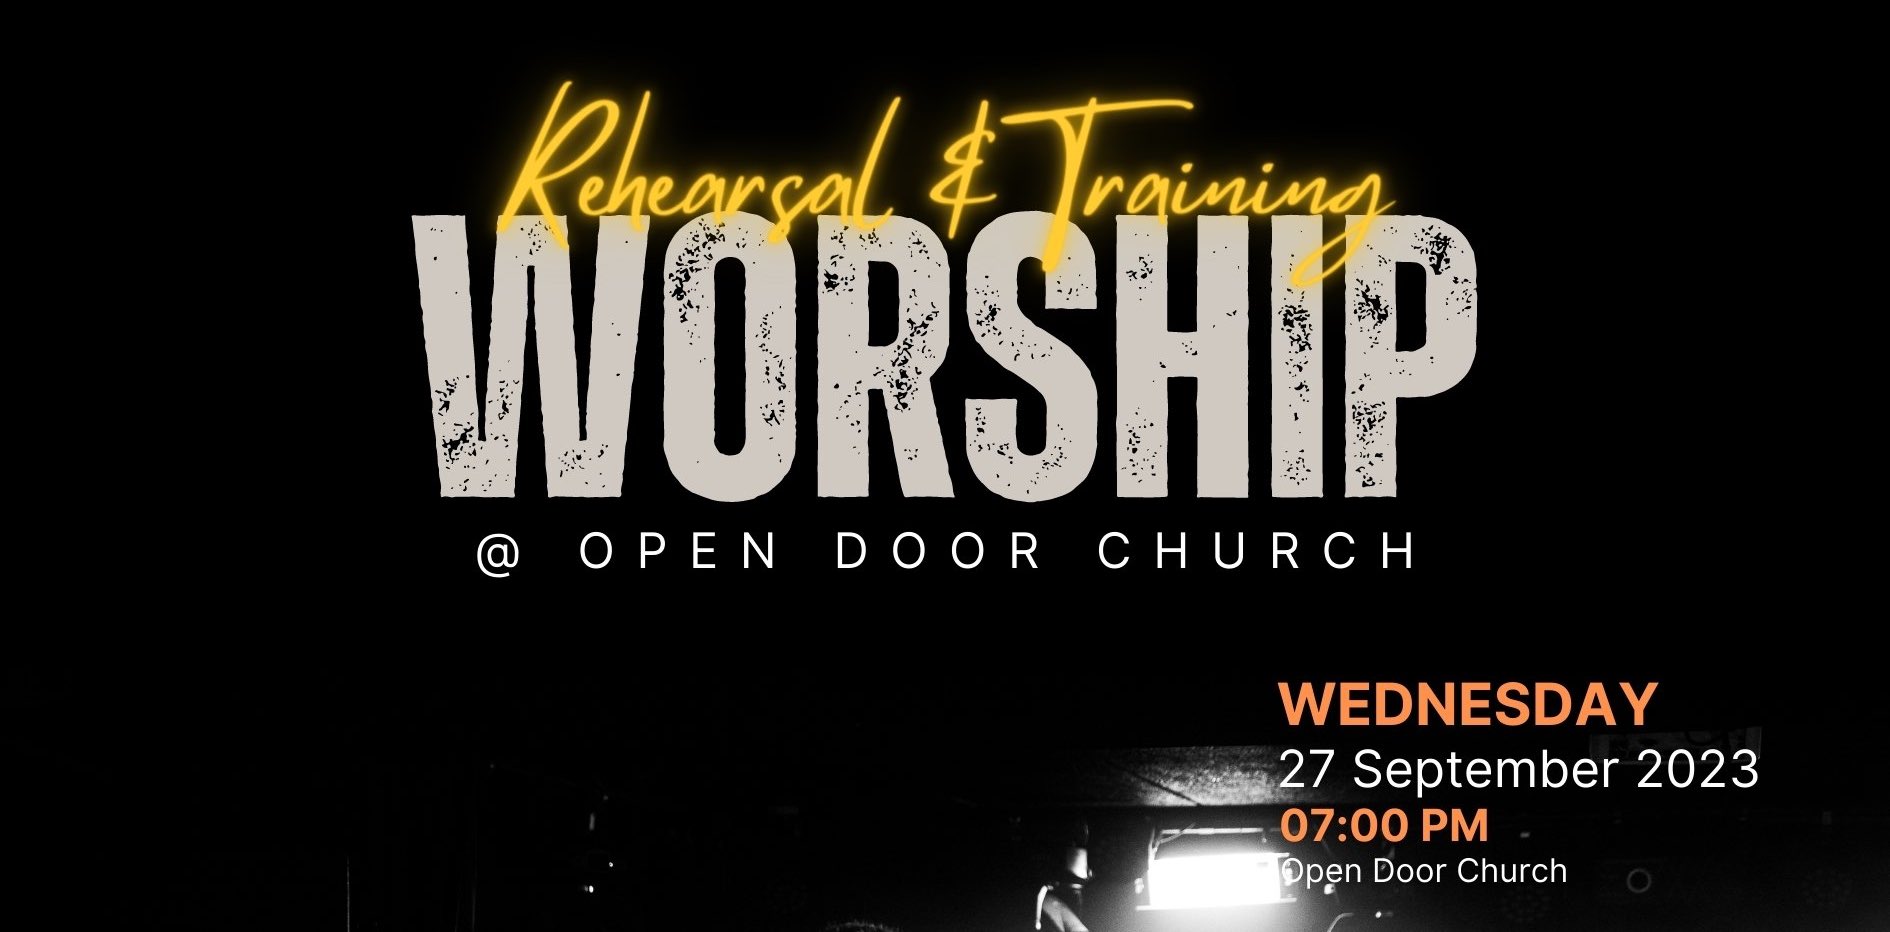 A graphic showing the details for a worship rehearsal and training night at open door church in maple ridge, bc.